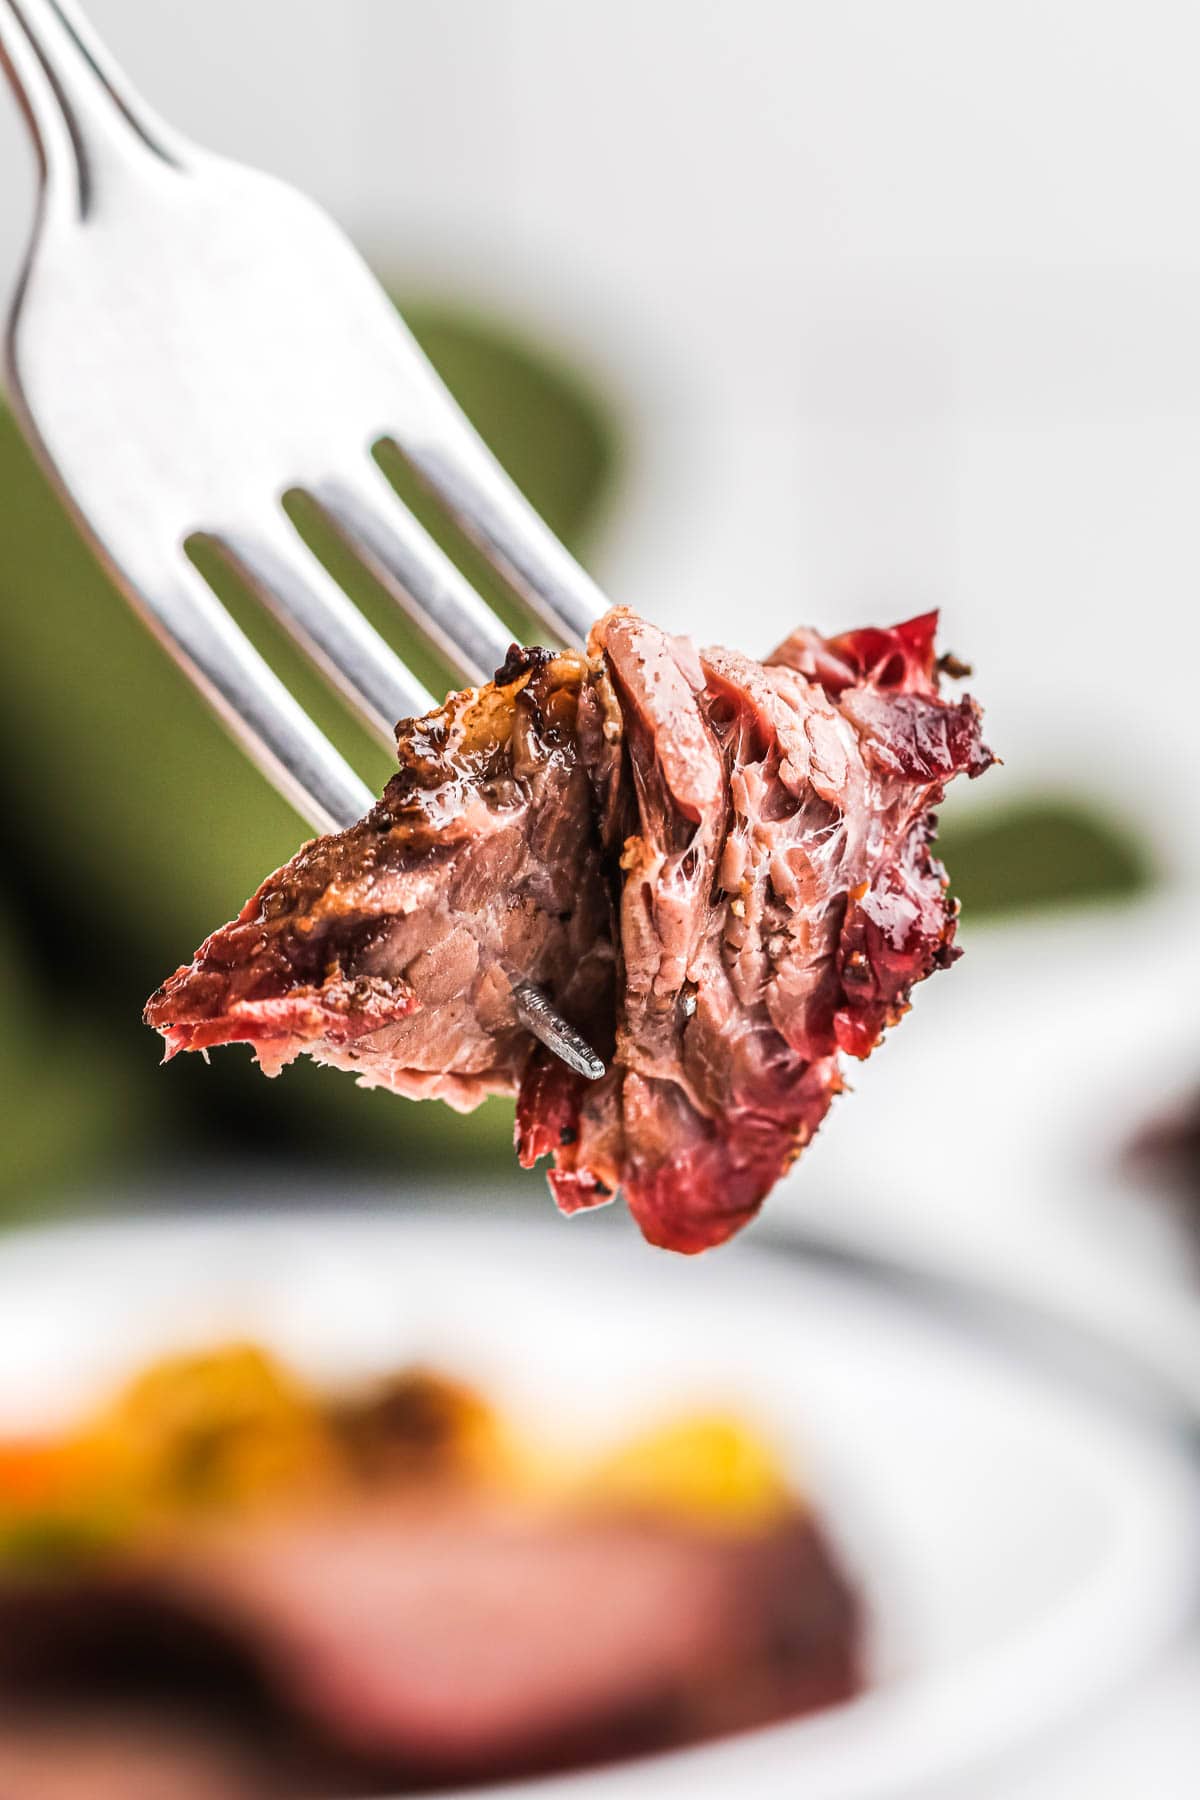 A spice of smoked beef on a fork to show tenderness of the meat